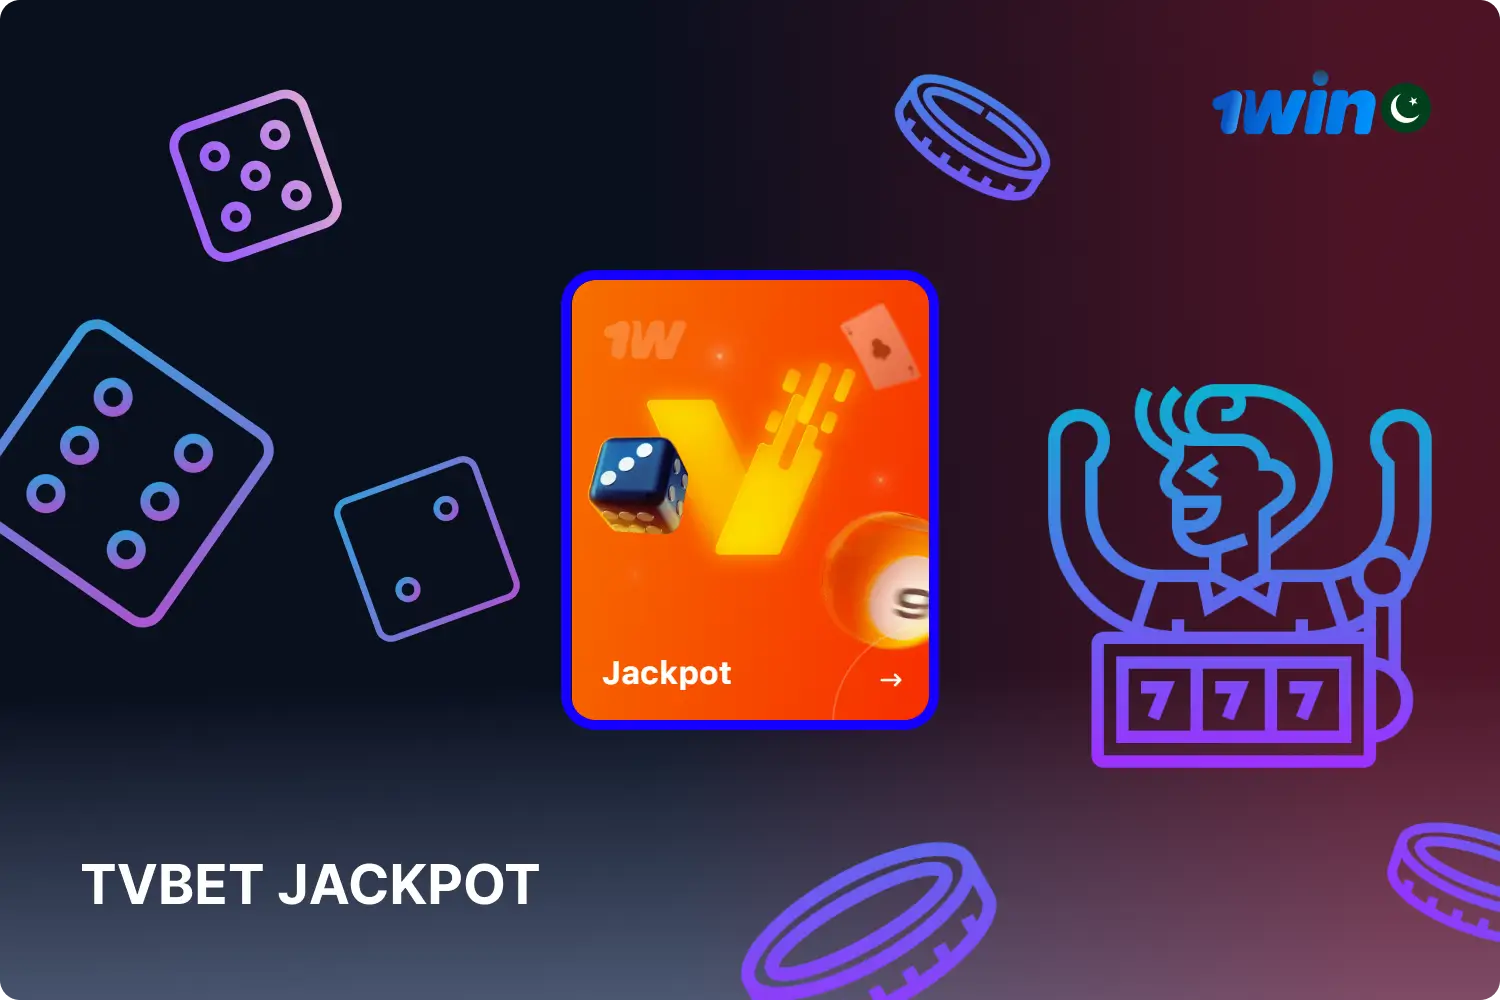 TVBet is giving Pakistani 1win players the chance to compete for one of three jackpots